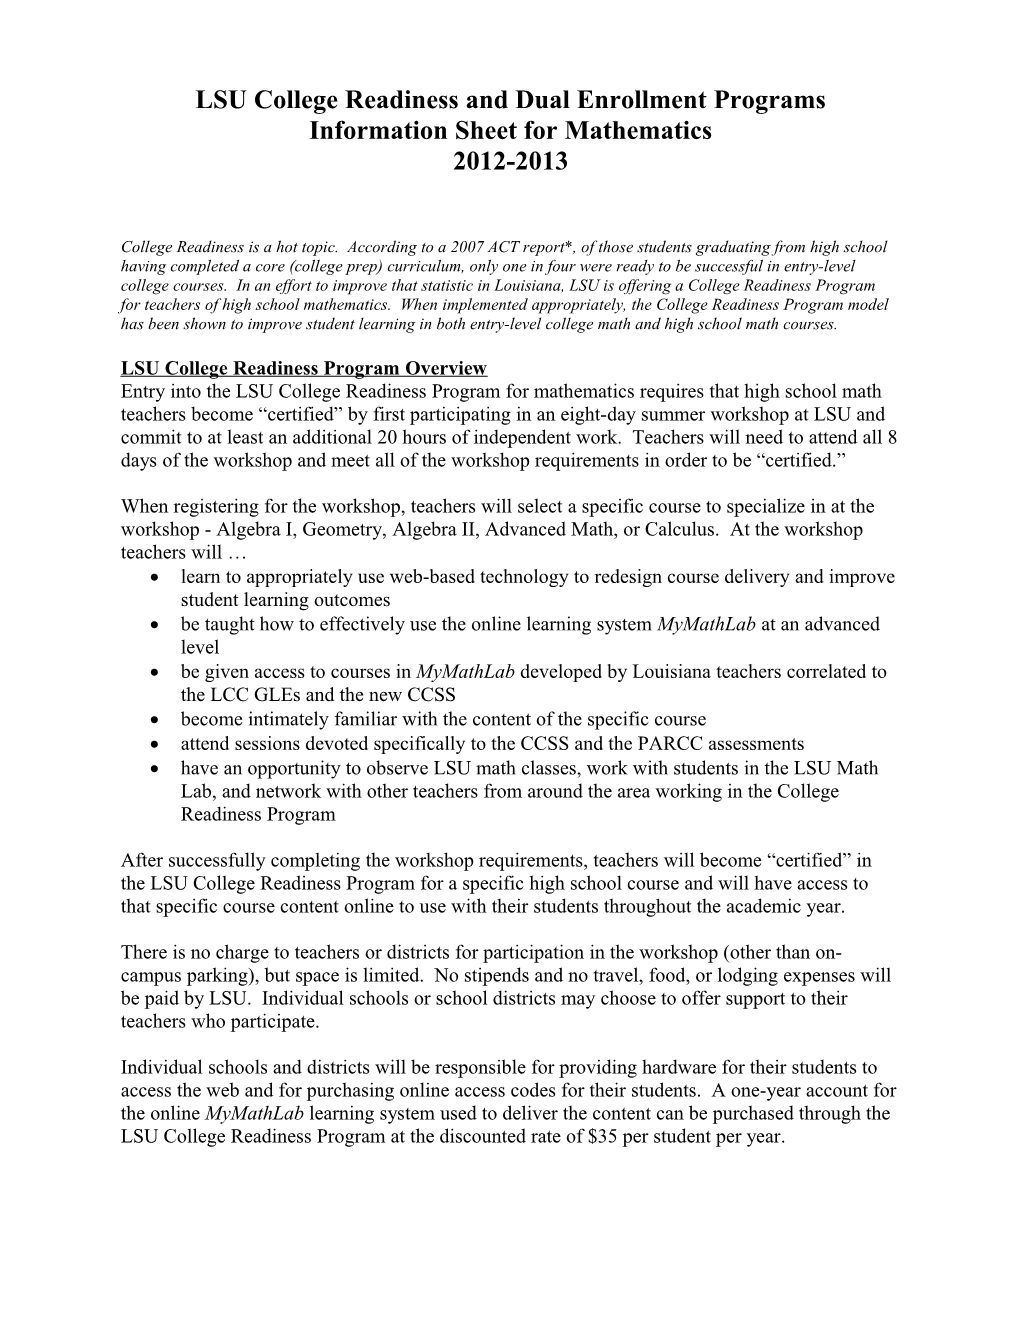 LSU College Readiness and Dual Enrollment Programs